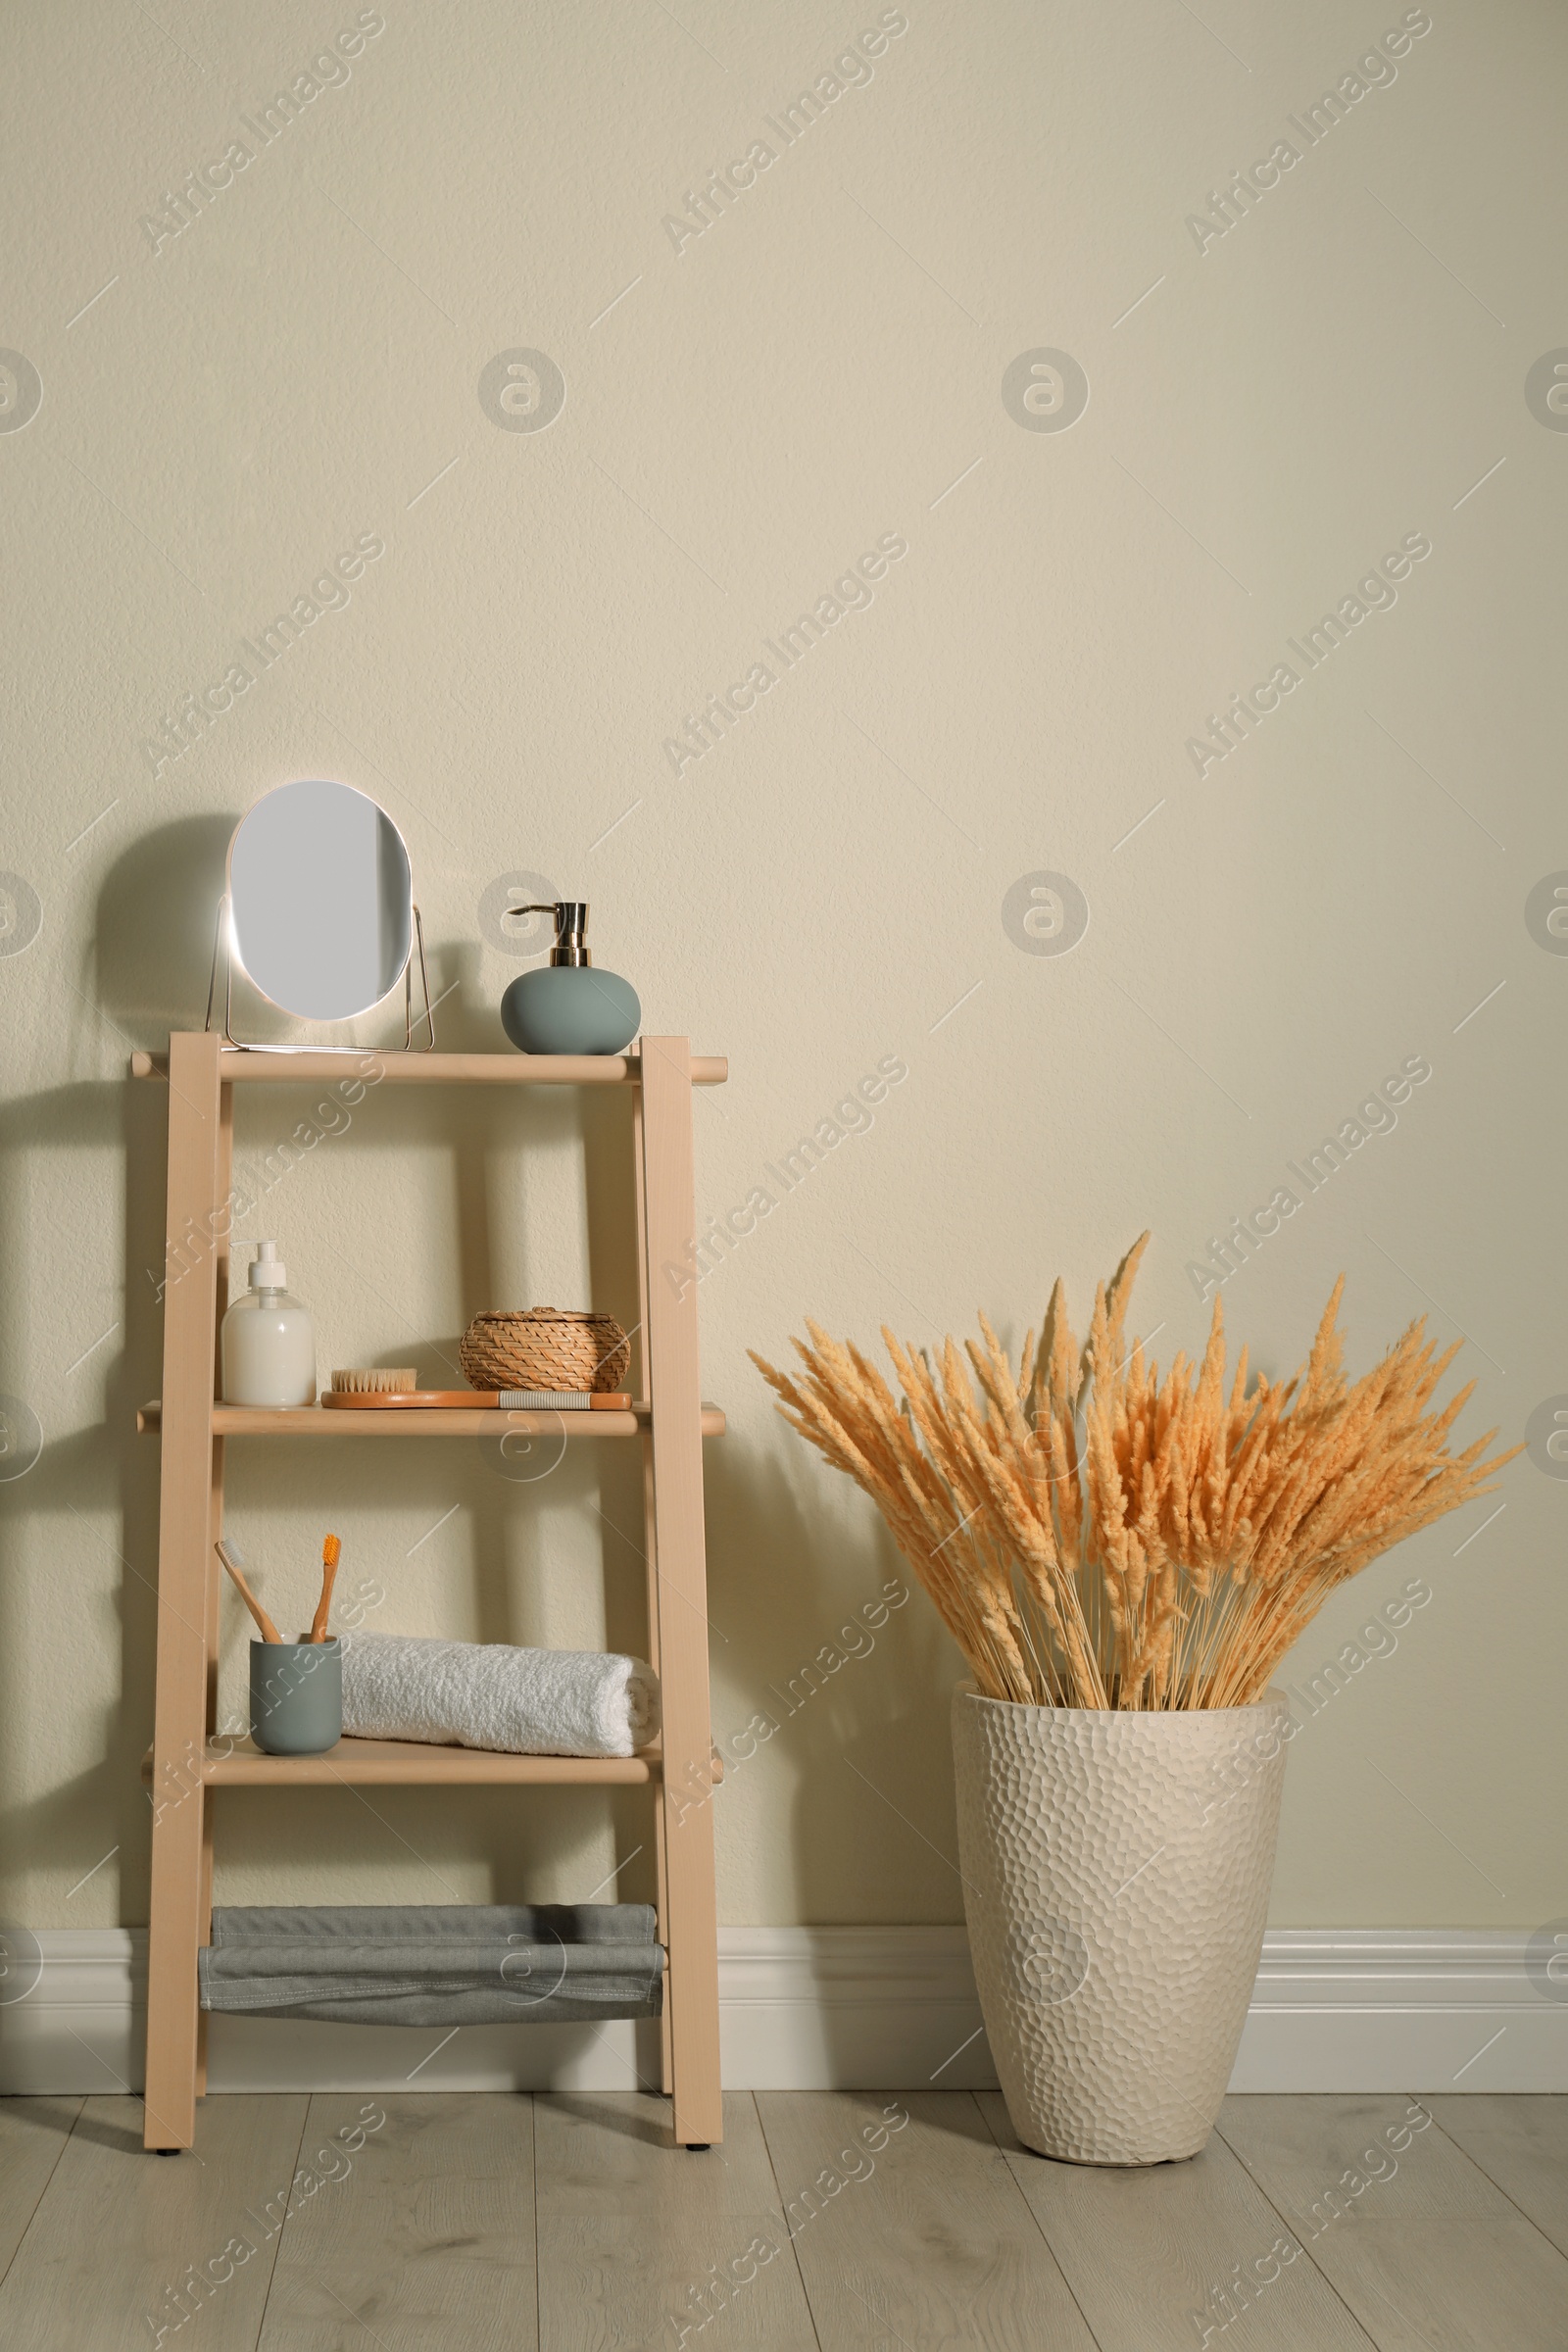 Photo of Wooden shelving unit with toiletries near light wall indoors. Bathroom interior element